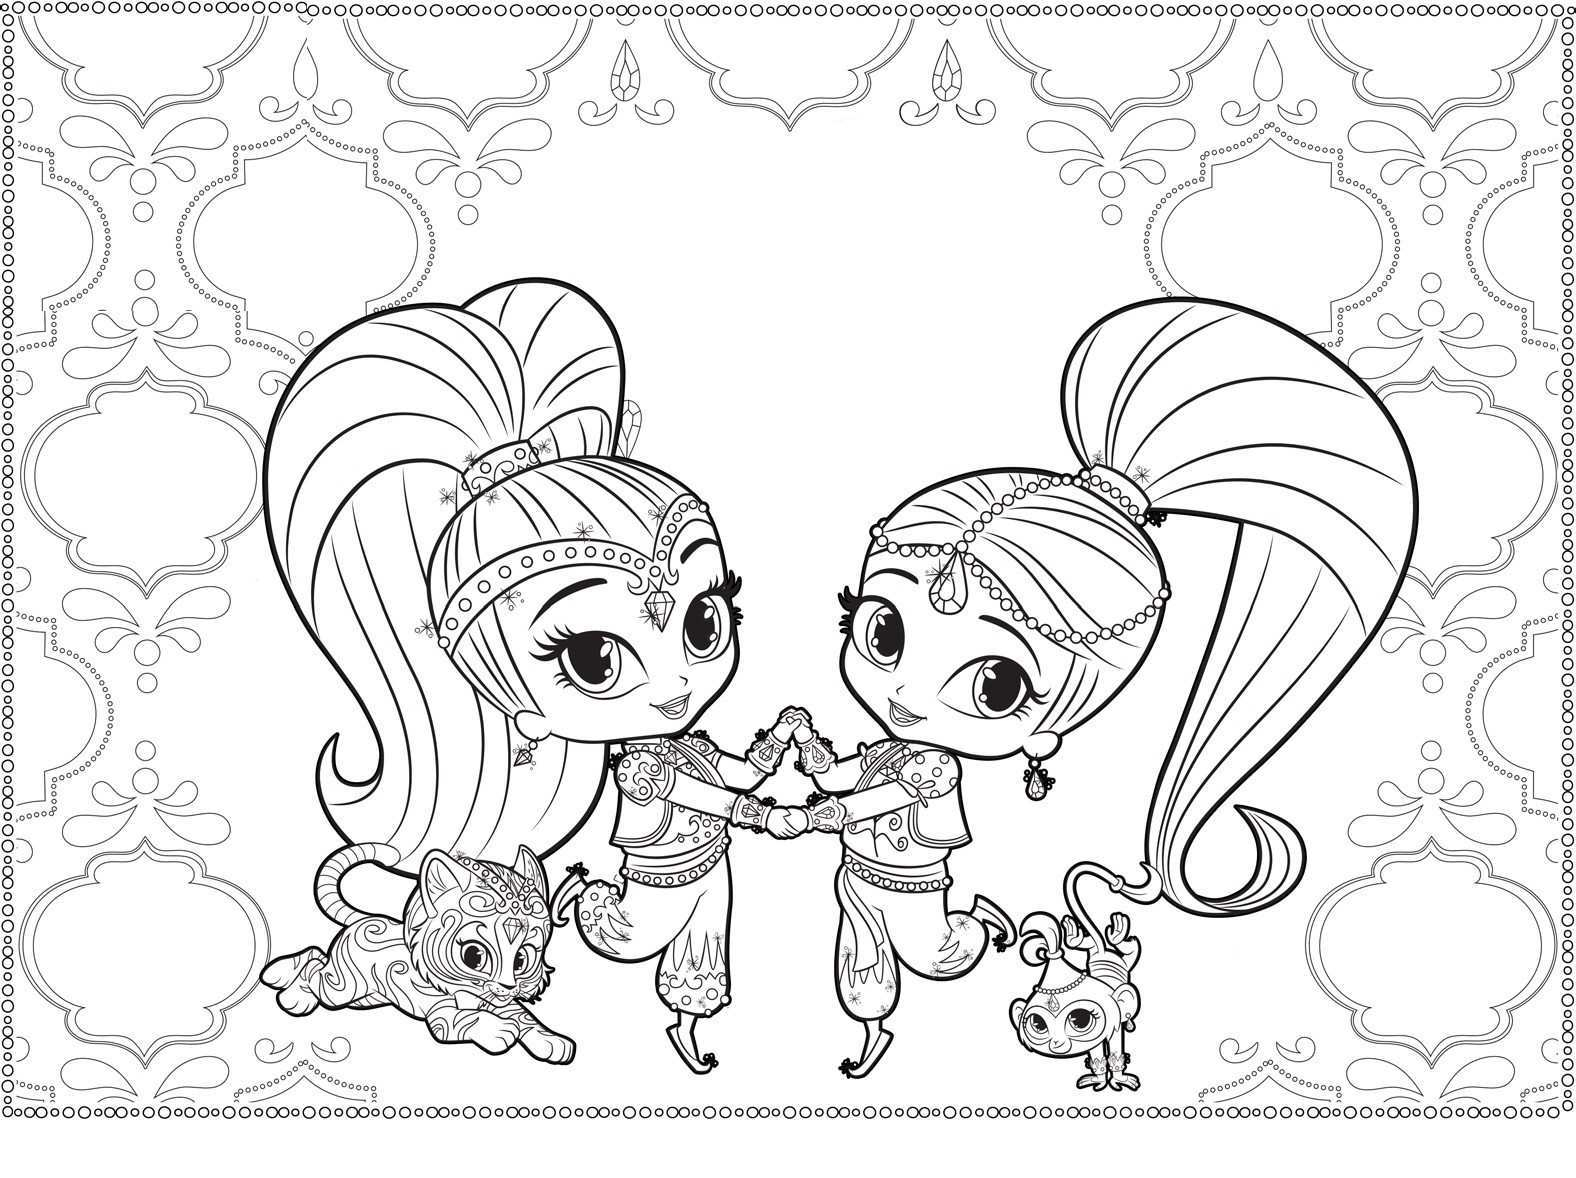 Shimmer And Shine Coloring Pages To Print Coloring Pages Showing Respect Beautiful Shimmer And Shine Printable